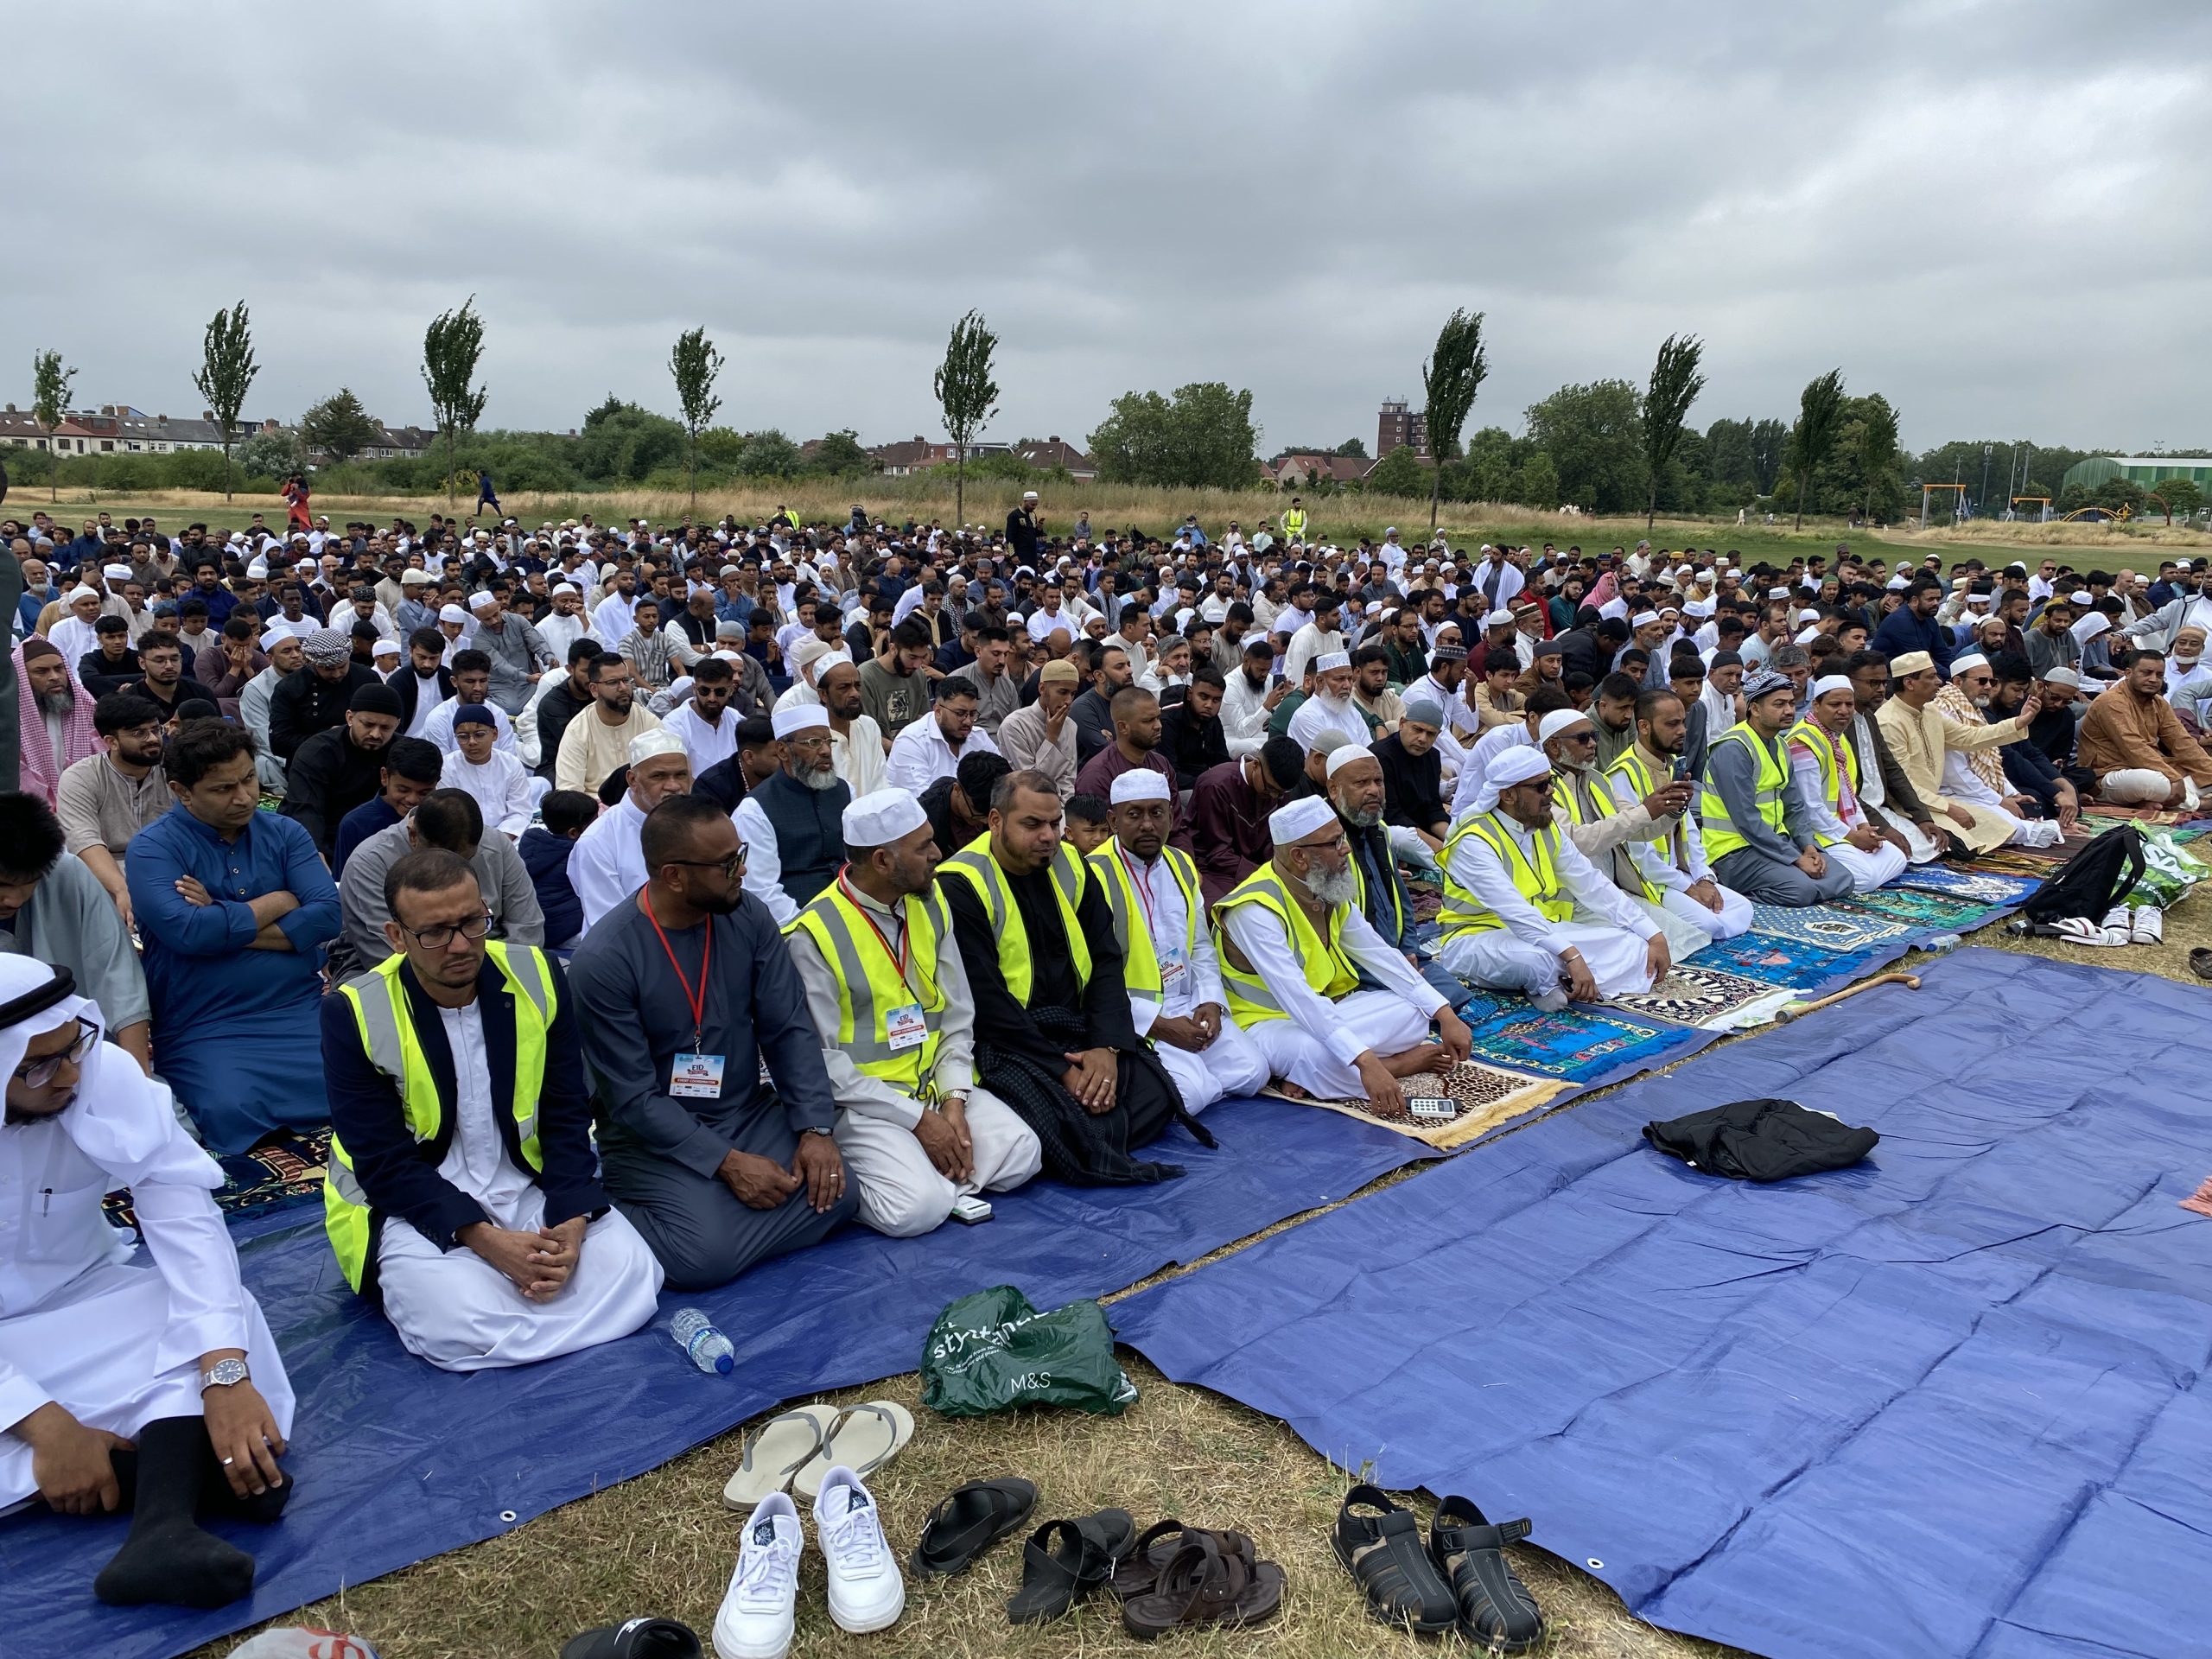 Three organisations unite to deliver the largest Eid congregation in Mayesbrook Park